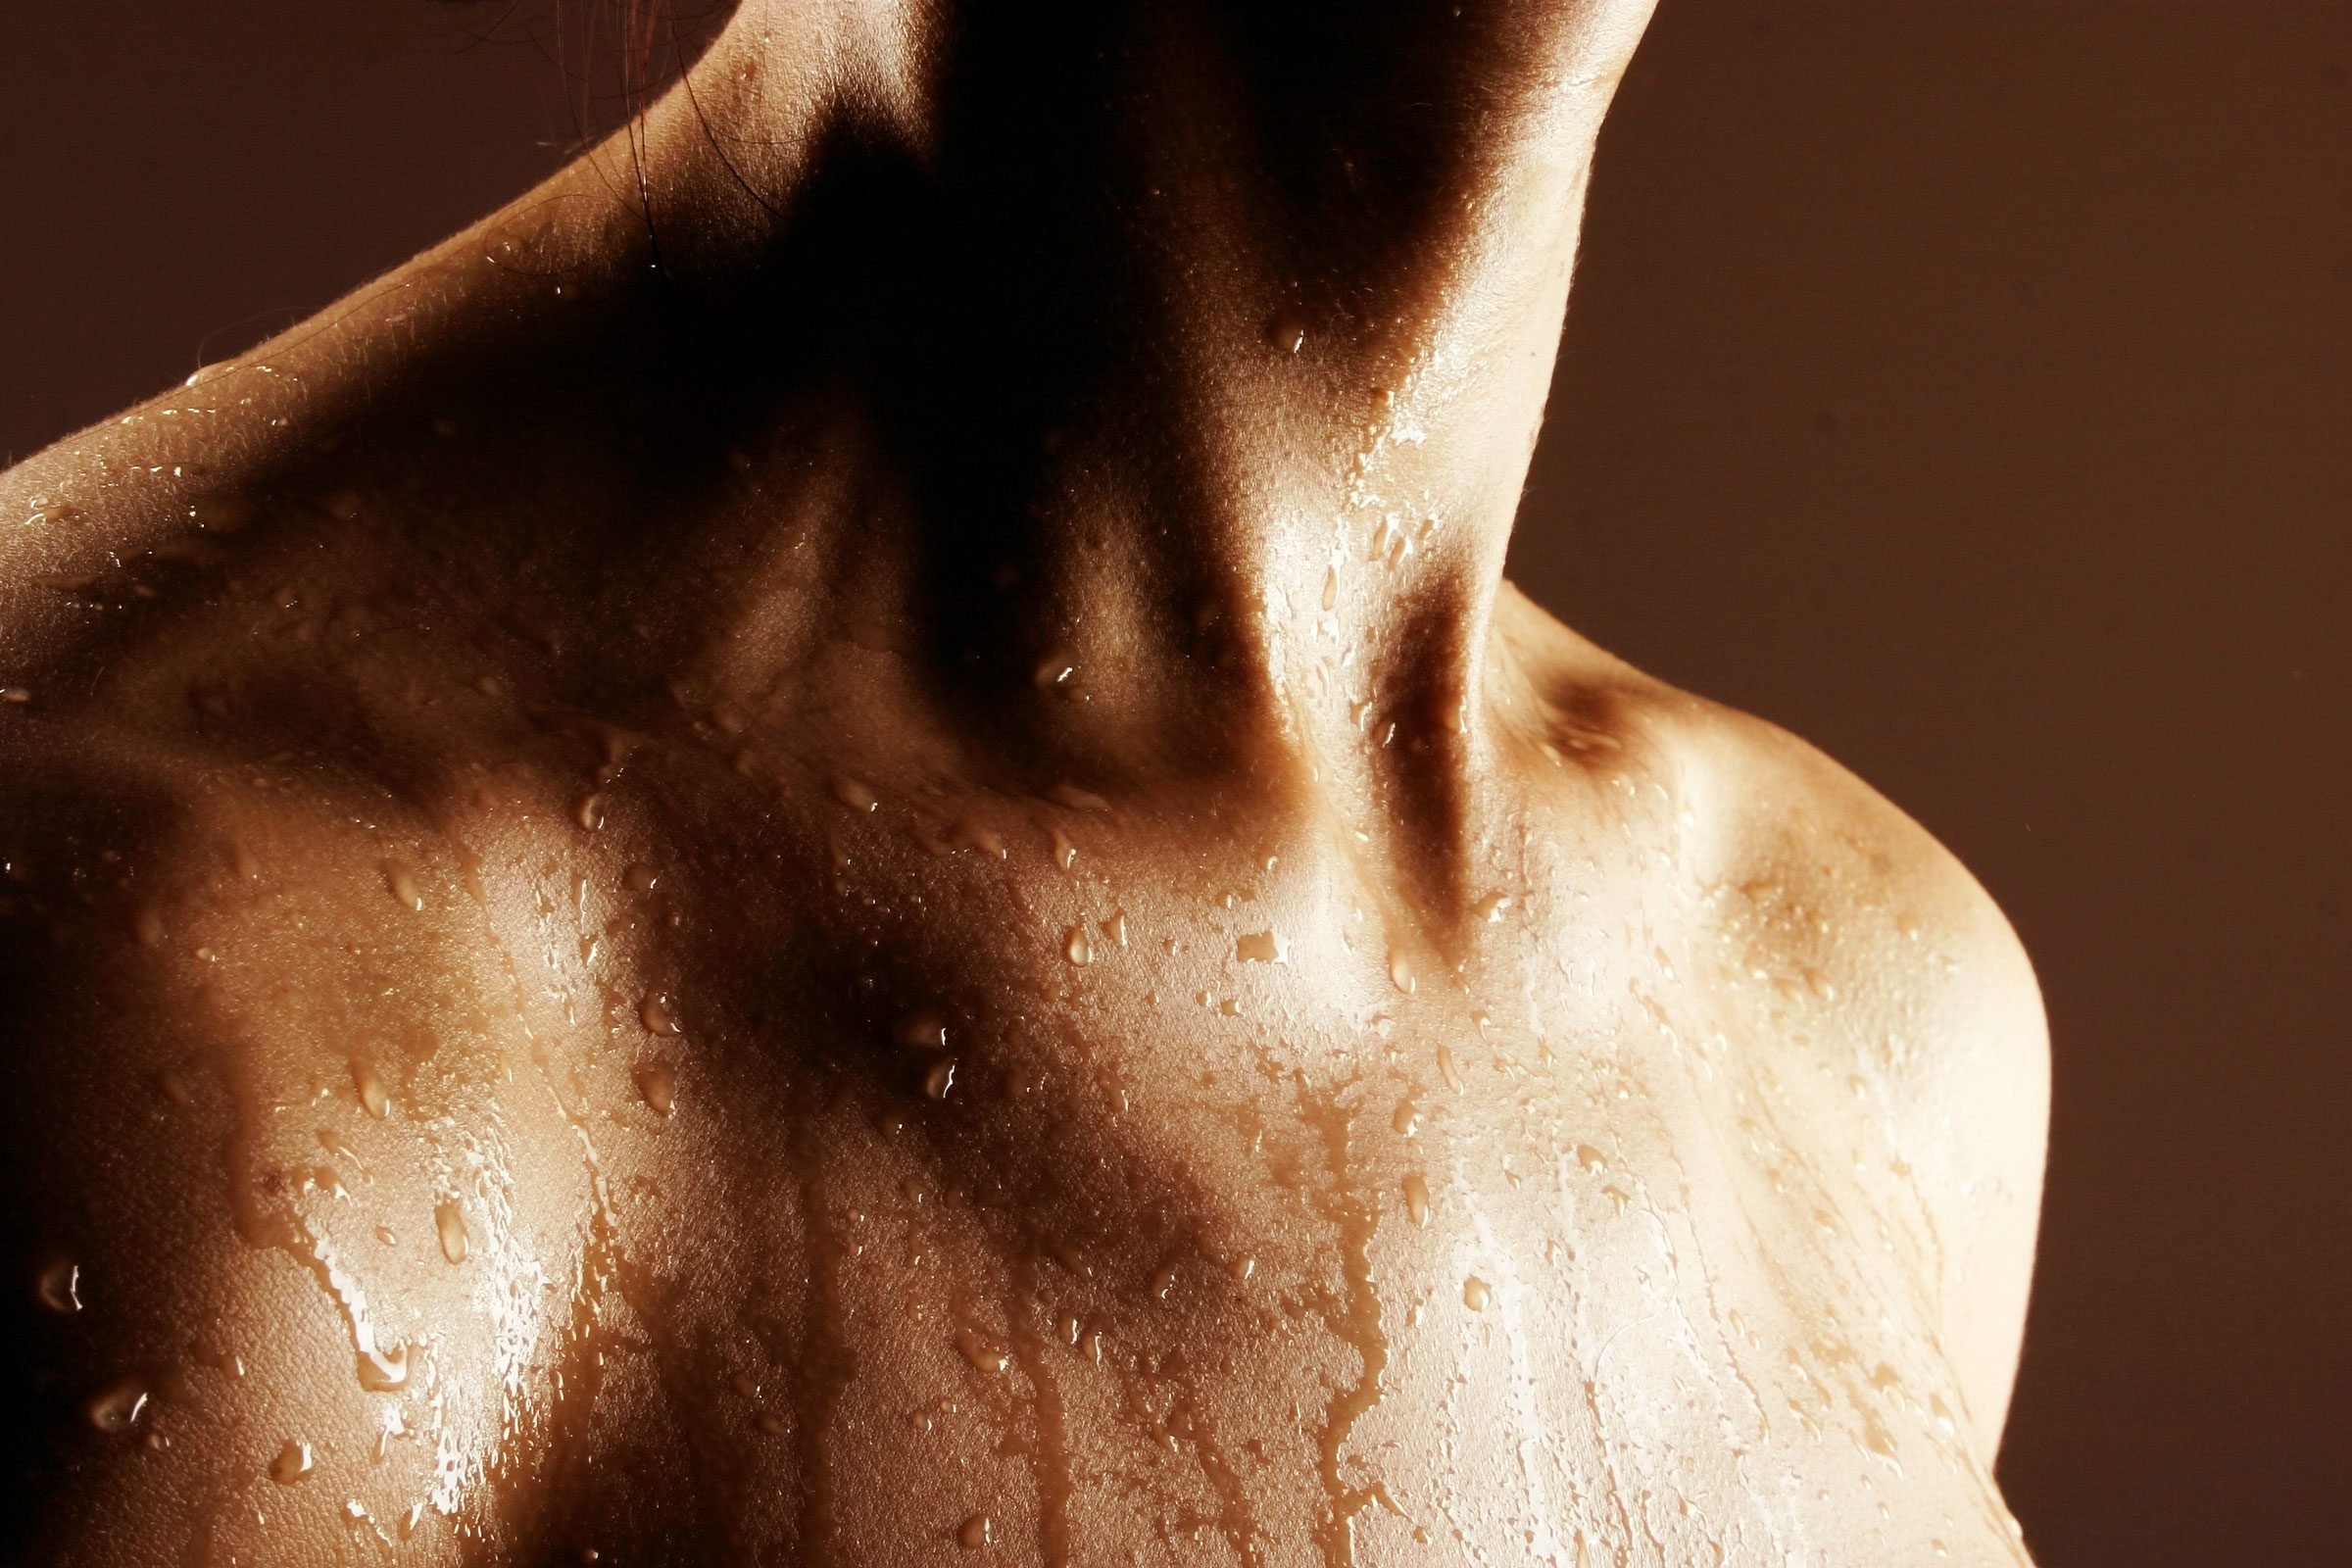 close up of sweat on skin from exercising and burning calories